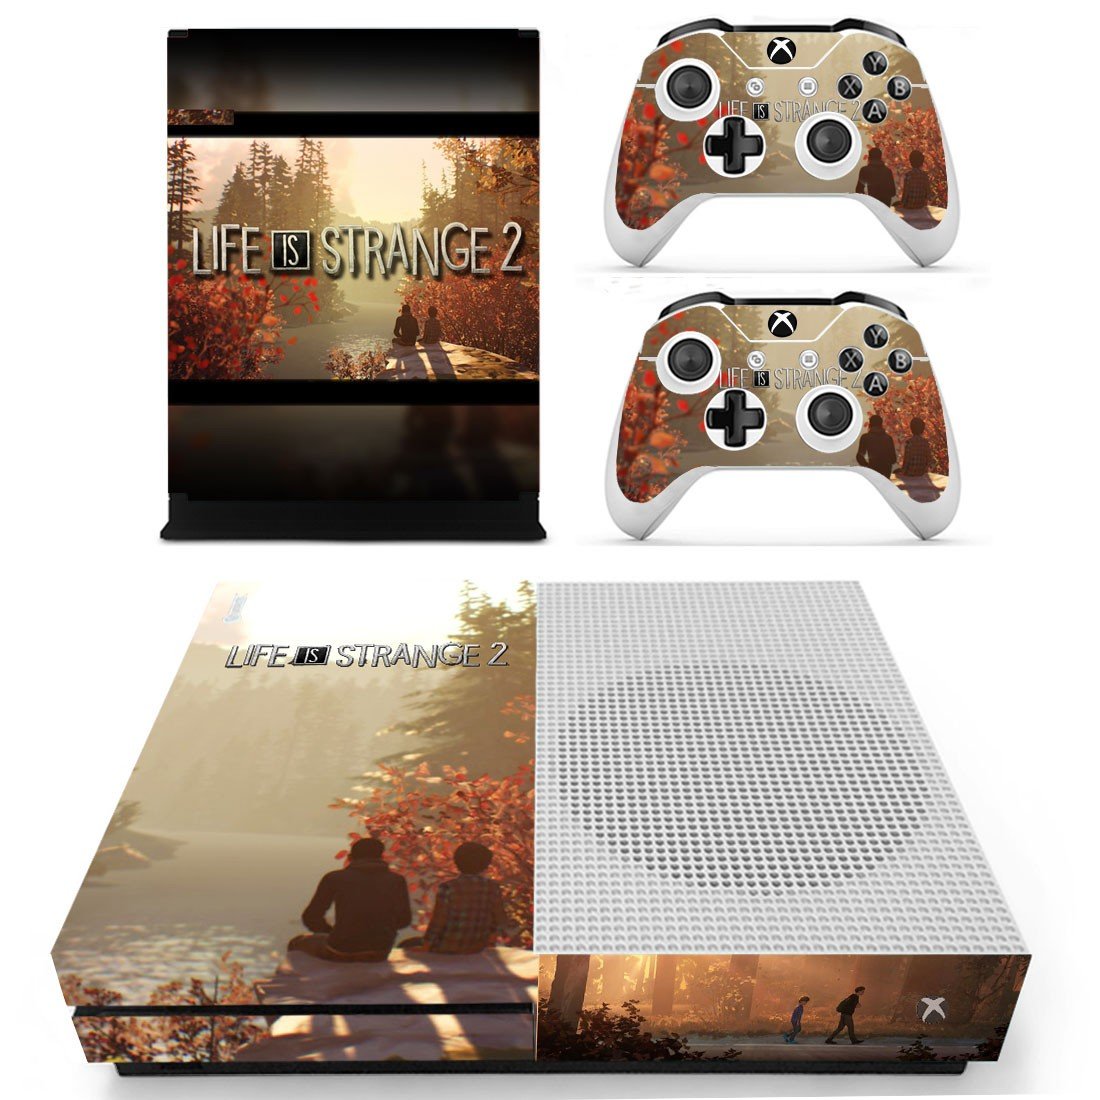 Xbox One S And Controllers Skin Sticker - Life Is Strange 2